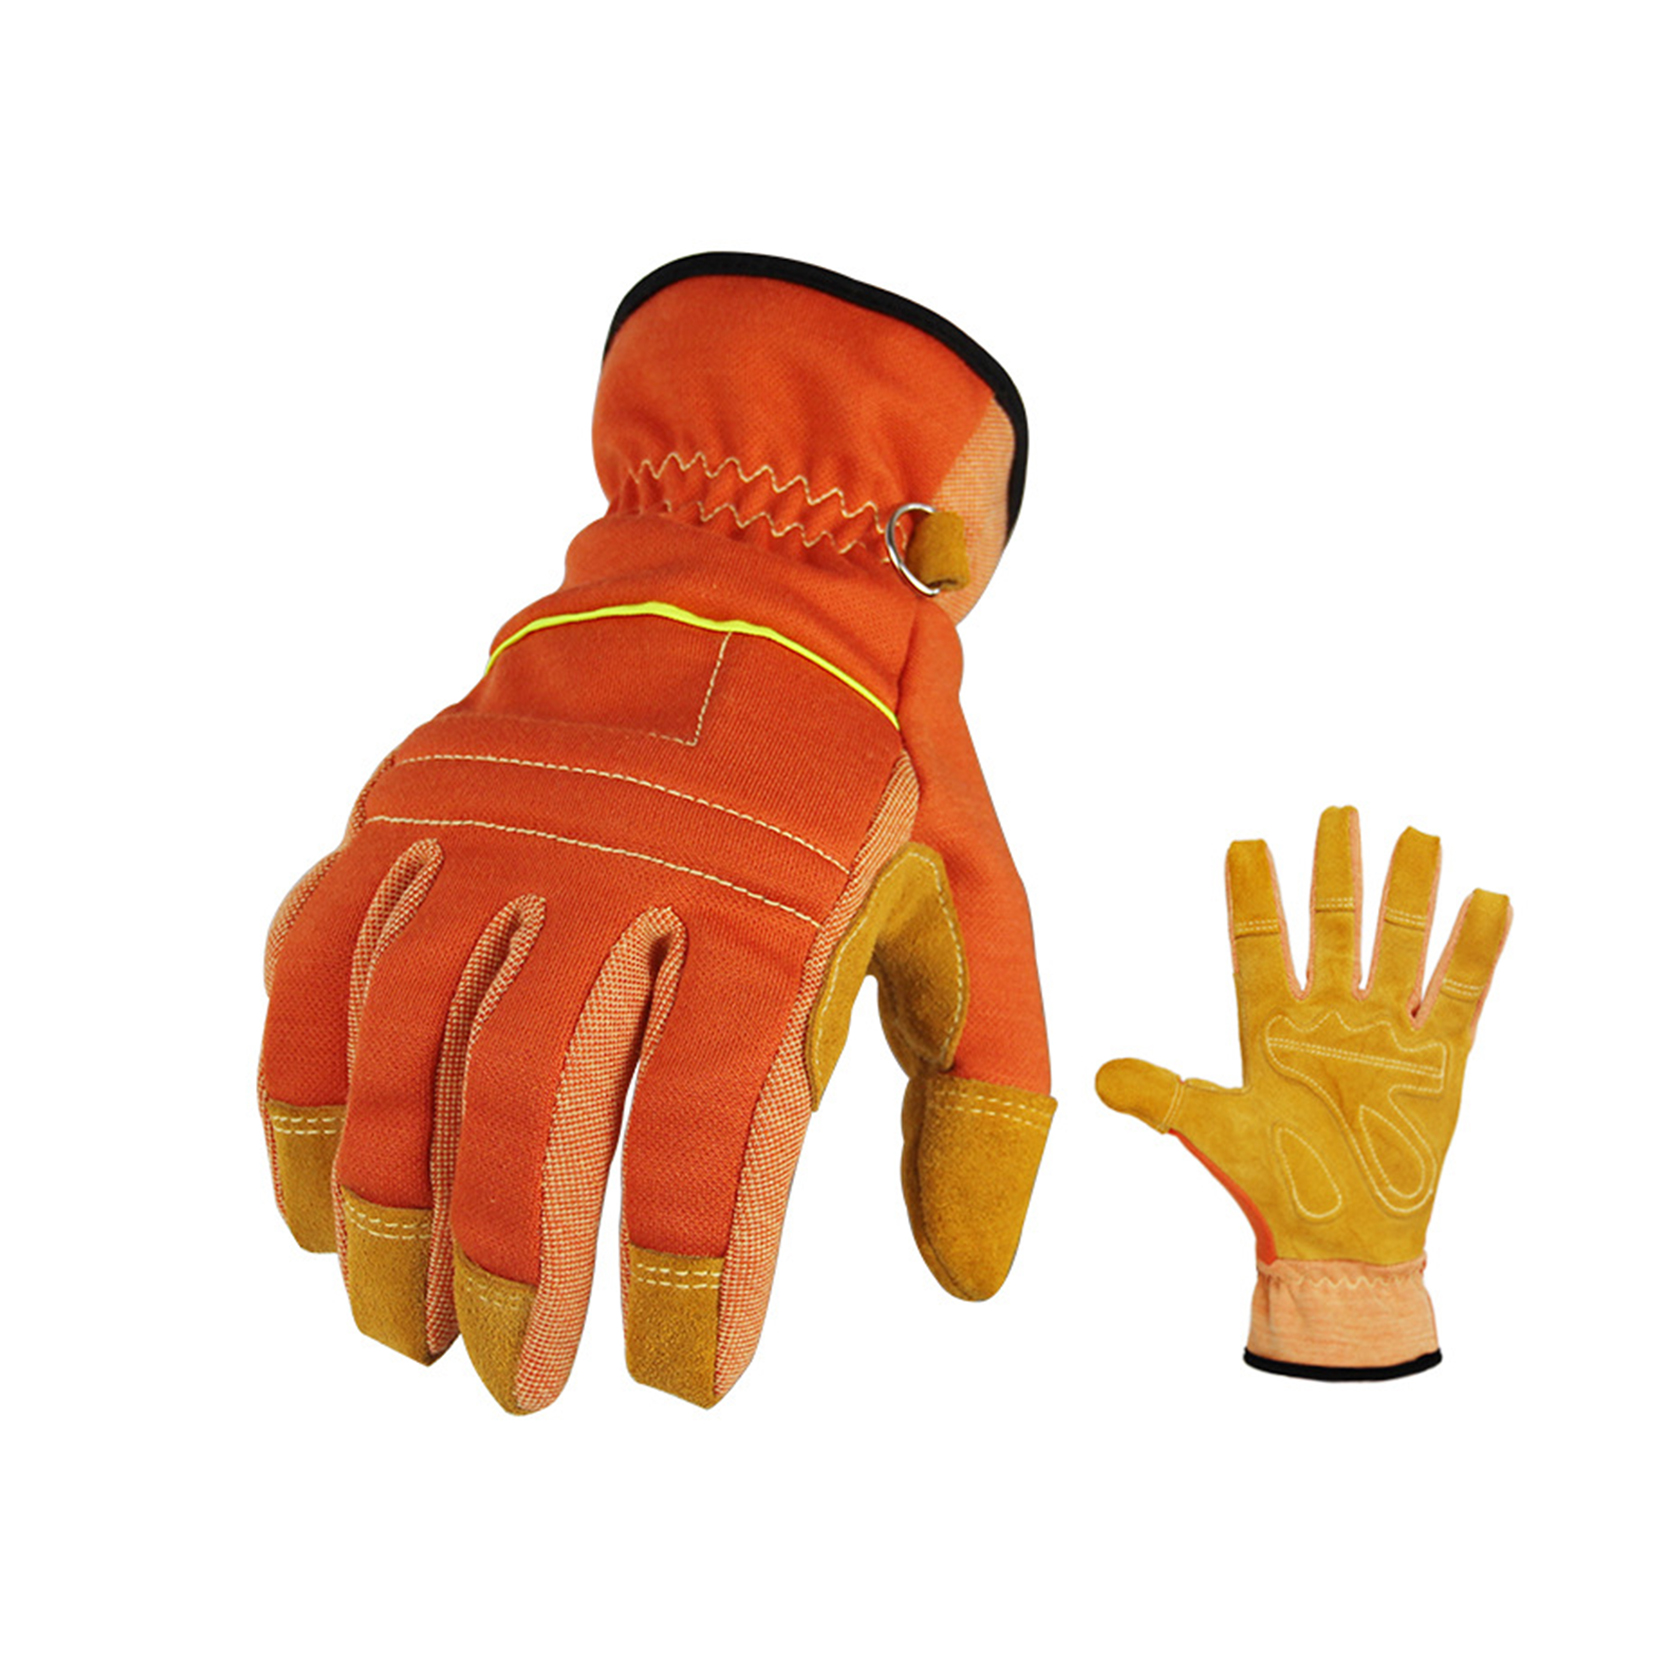 General Utility Work Gloves, Lalaki Babae Leather Gardening Welding Gloves